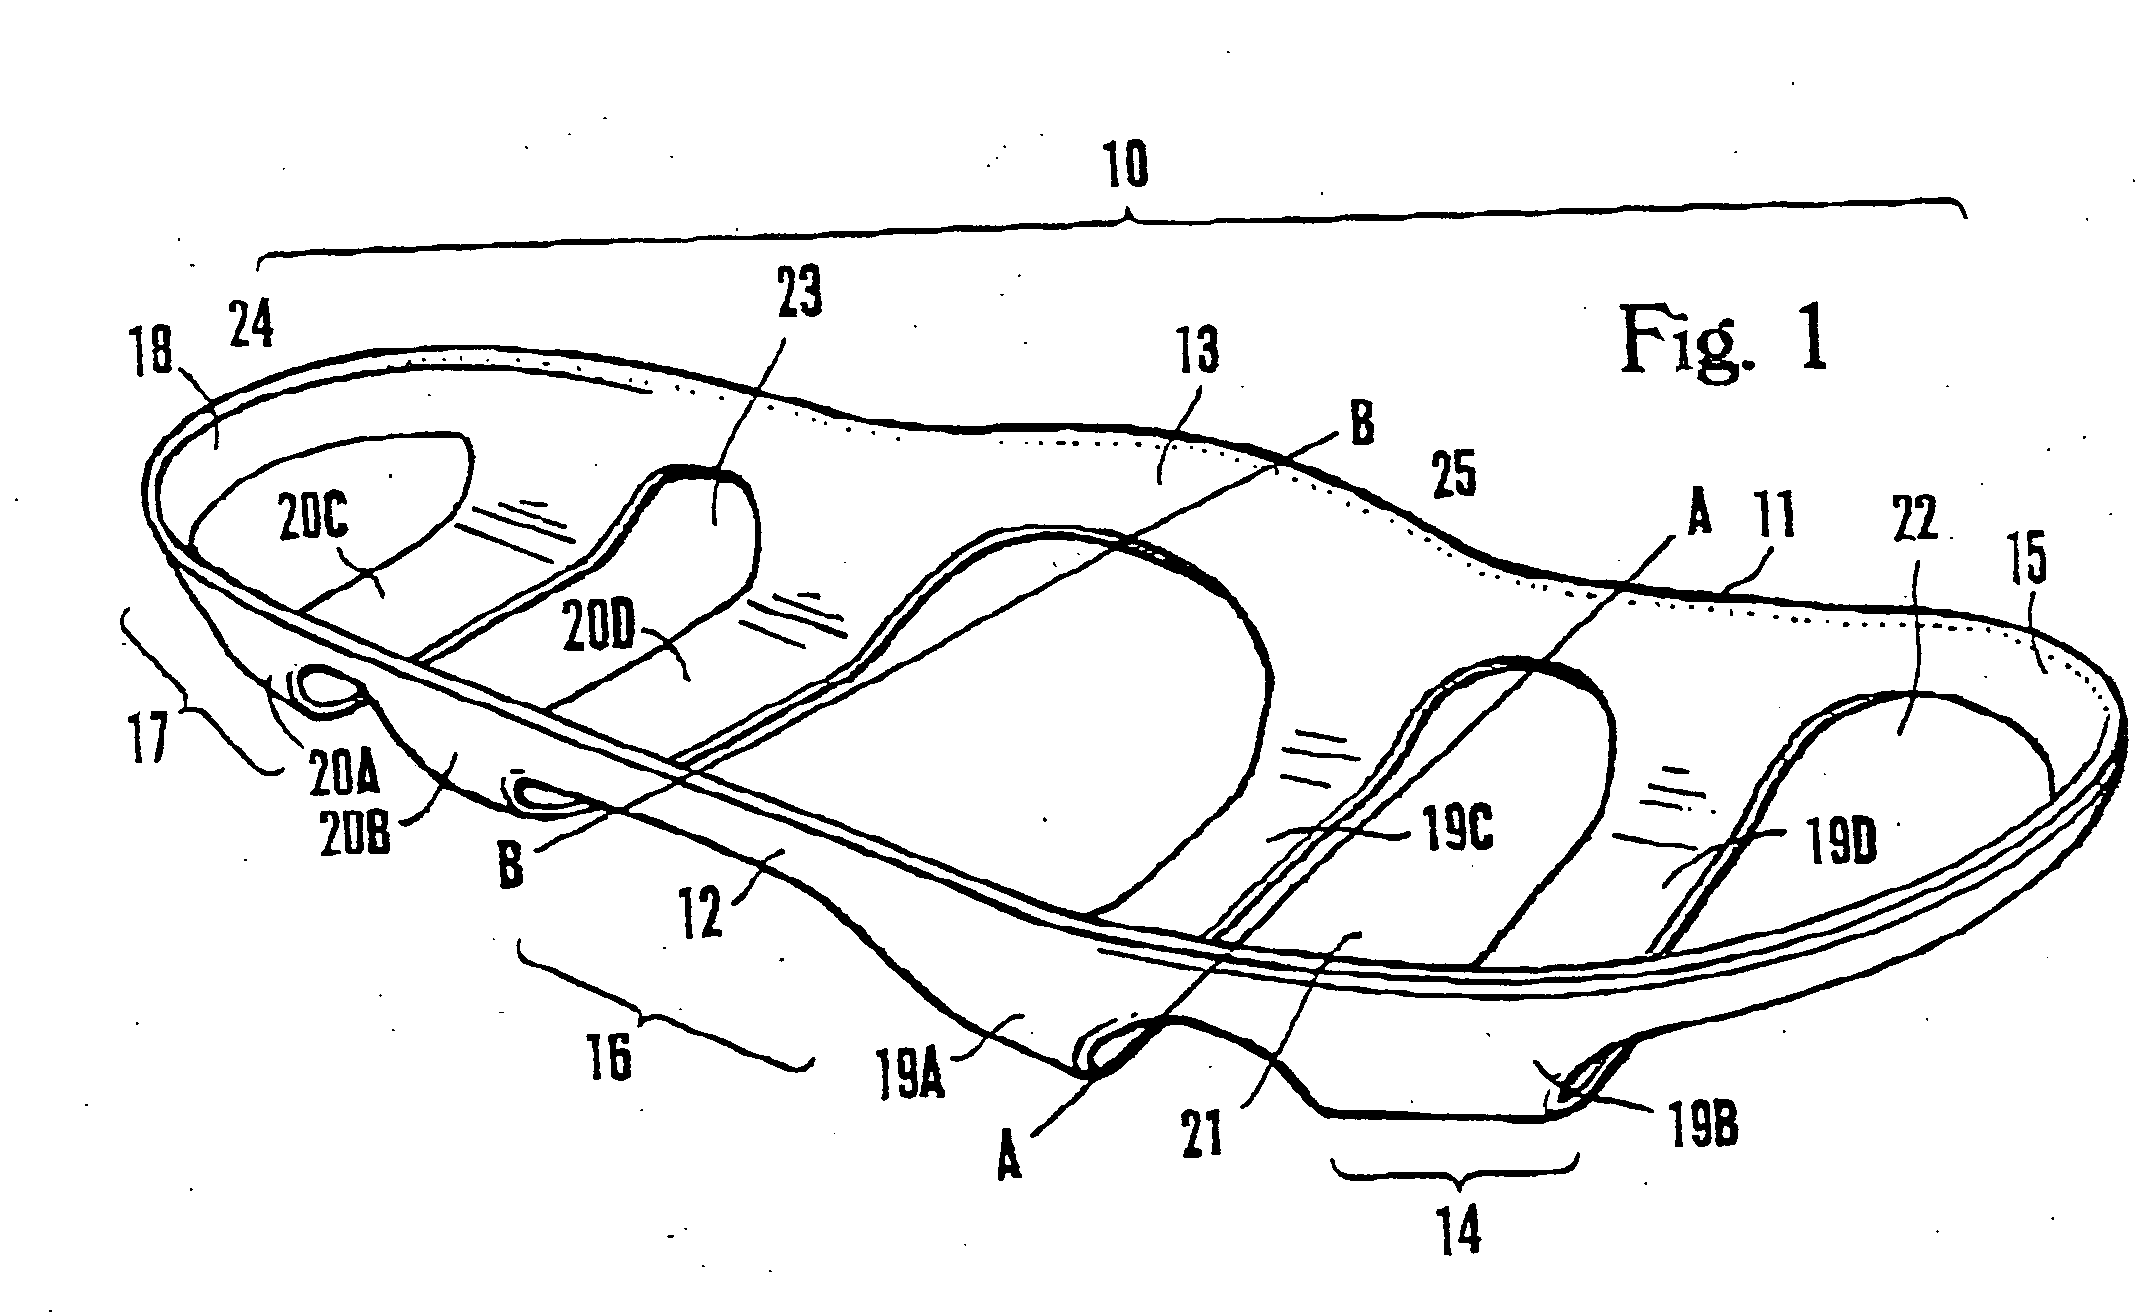 Device for suspending a foot within a shoe and shoes incorporating such devices